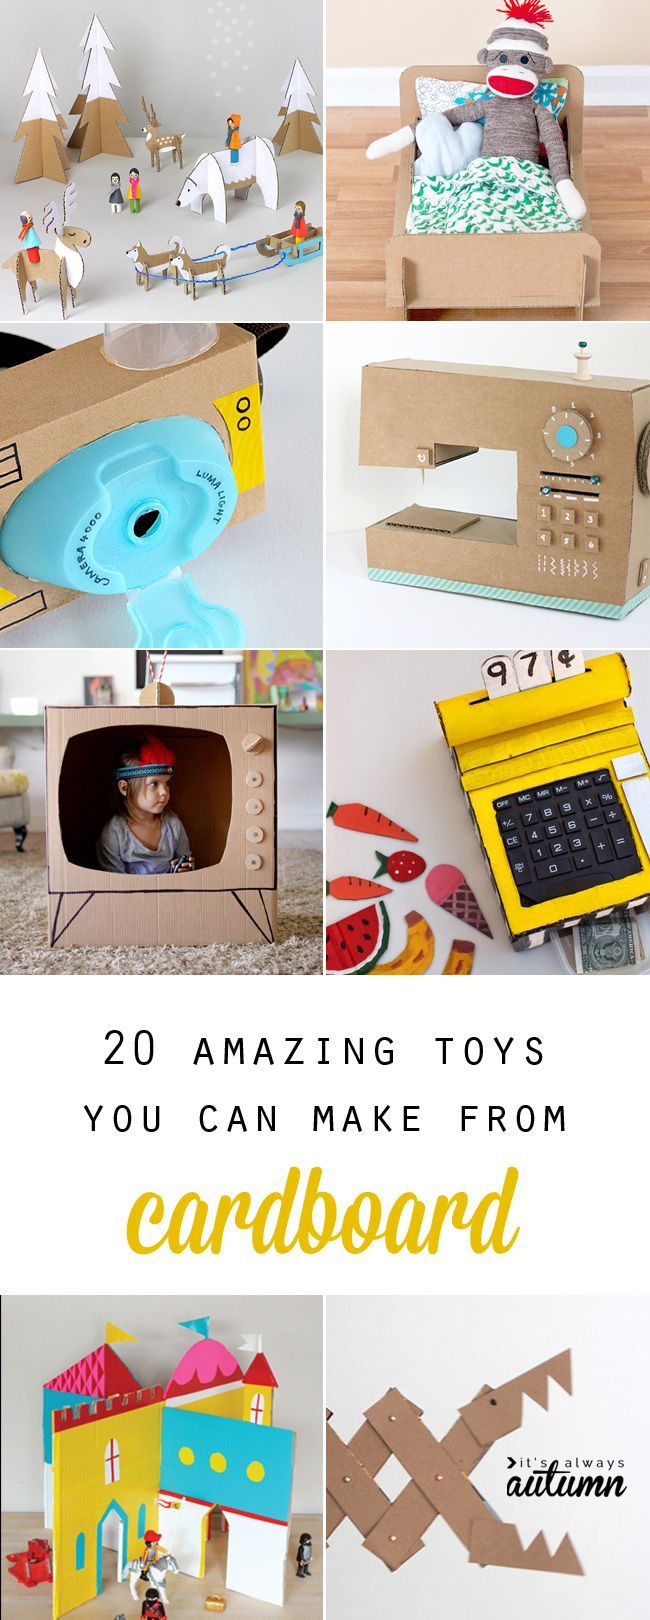 20 amazing toys you can make from cardboard – these would be great for rainy days or even for Christmas gifts!